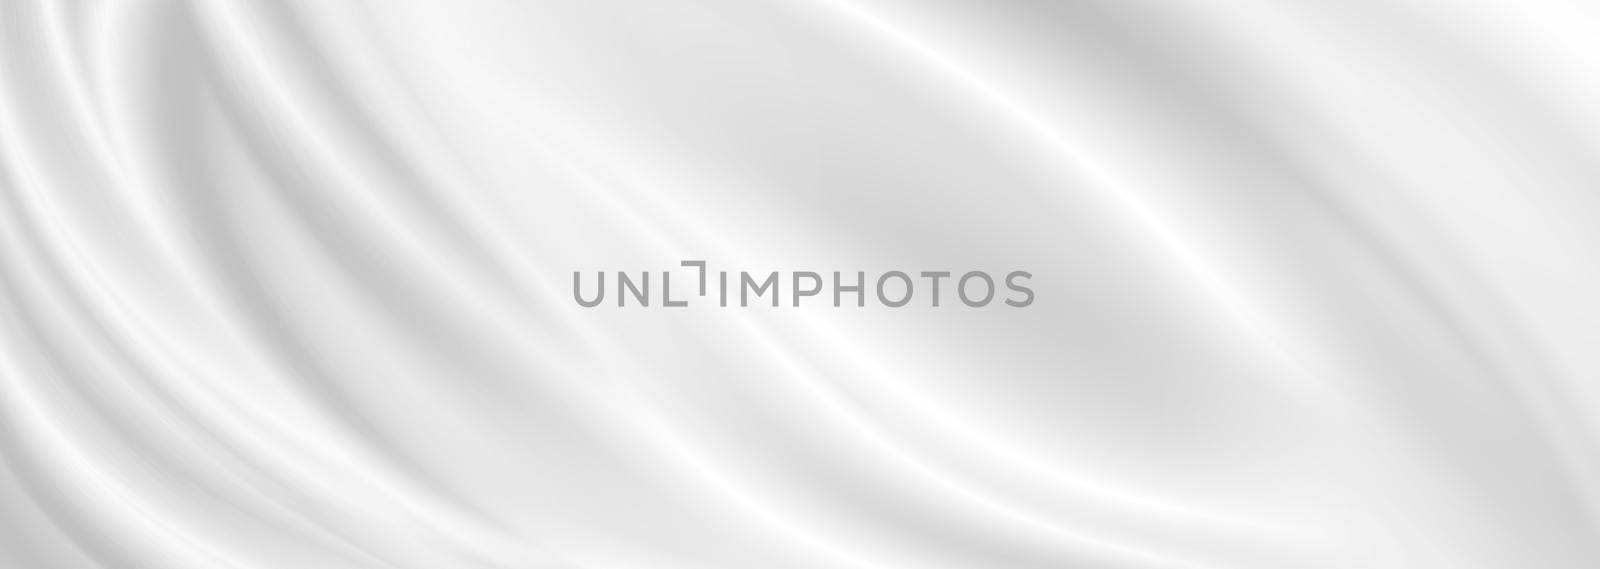 Abstract white fabric background with copy space 3D illustration by Myimagine